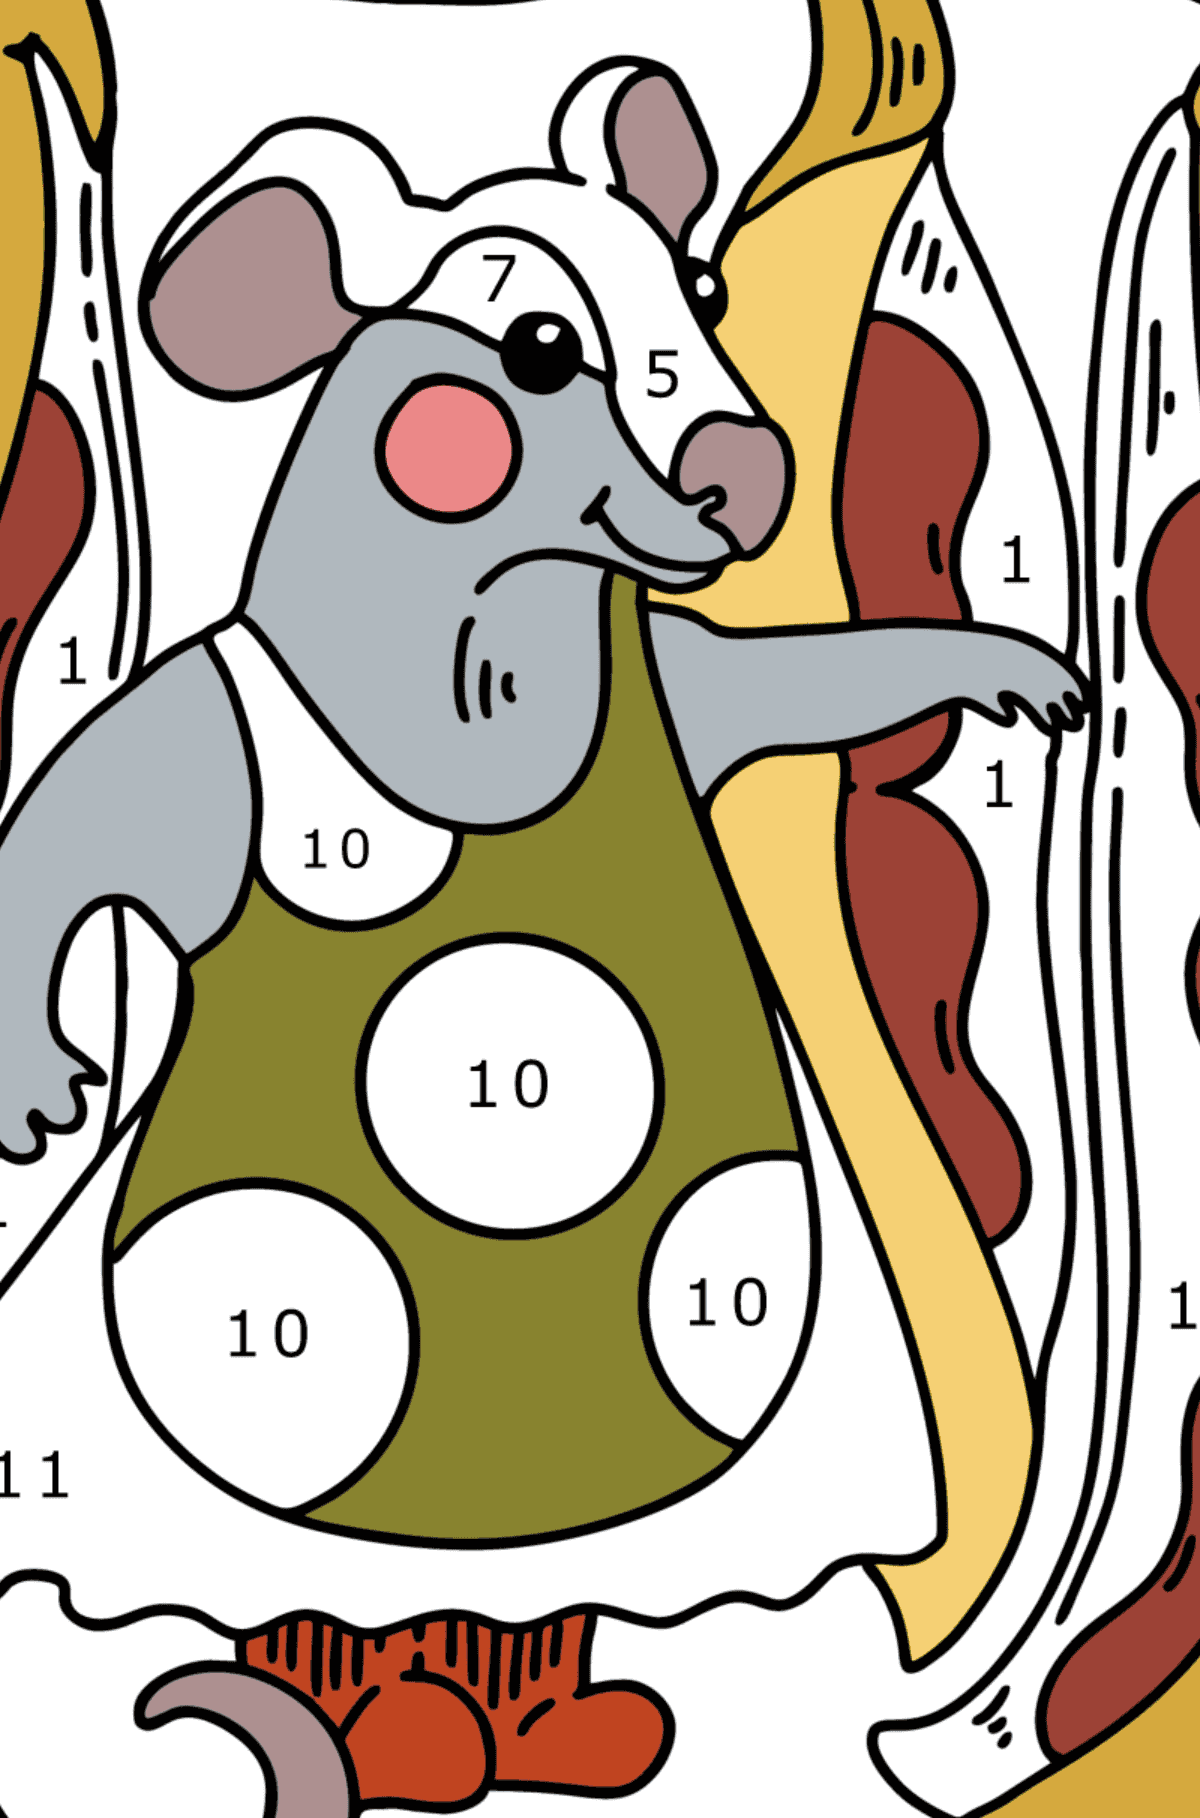 Coloring page - Cute Mouse - Coloring by Numbers for Kids